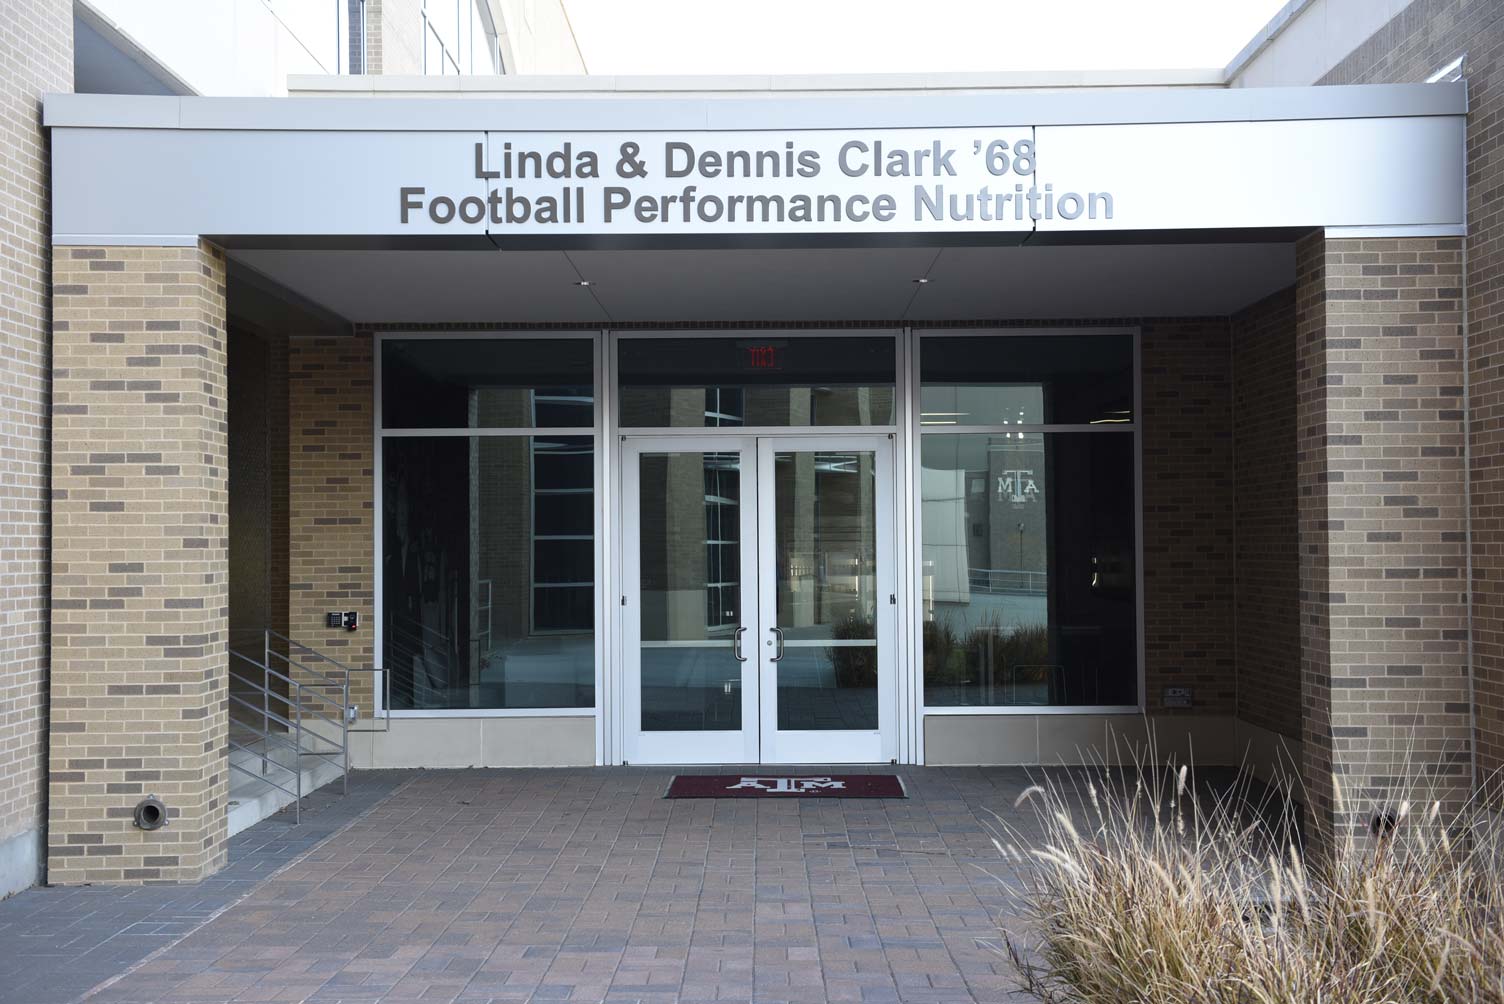 The front of the Football Performance Nutrition building